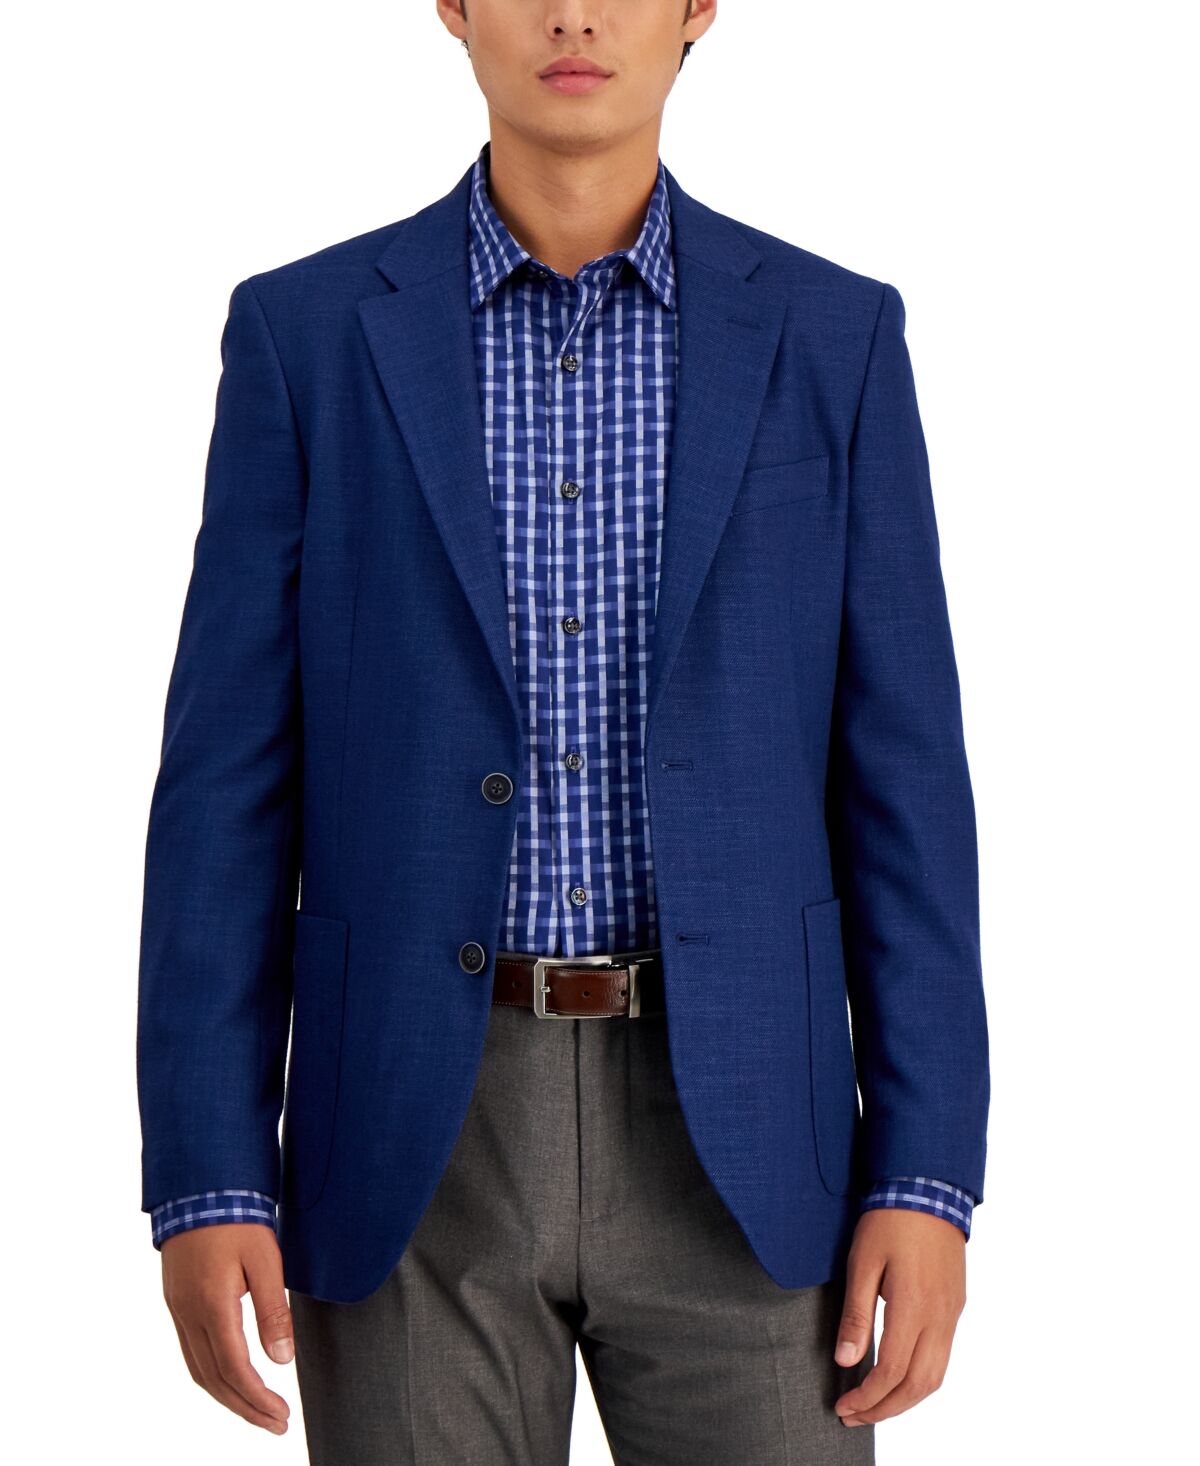 Nautica Men's Modern-Fit Active Stretch Woven Solid Sport Coat - Navy Blue